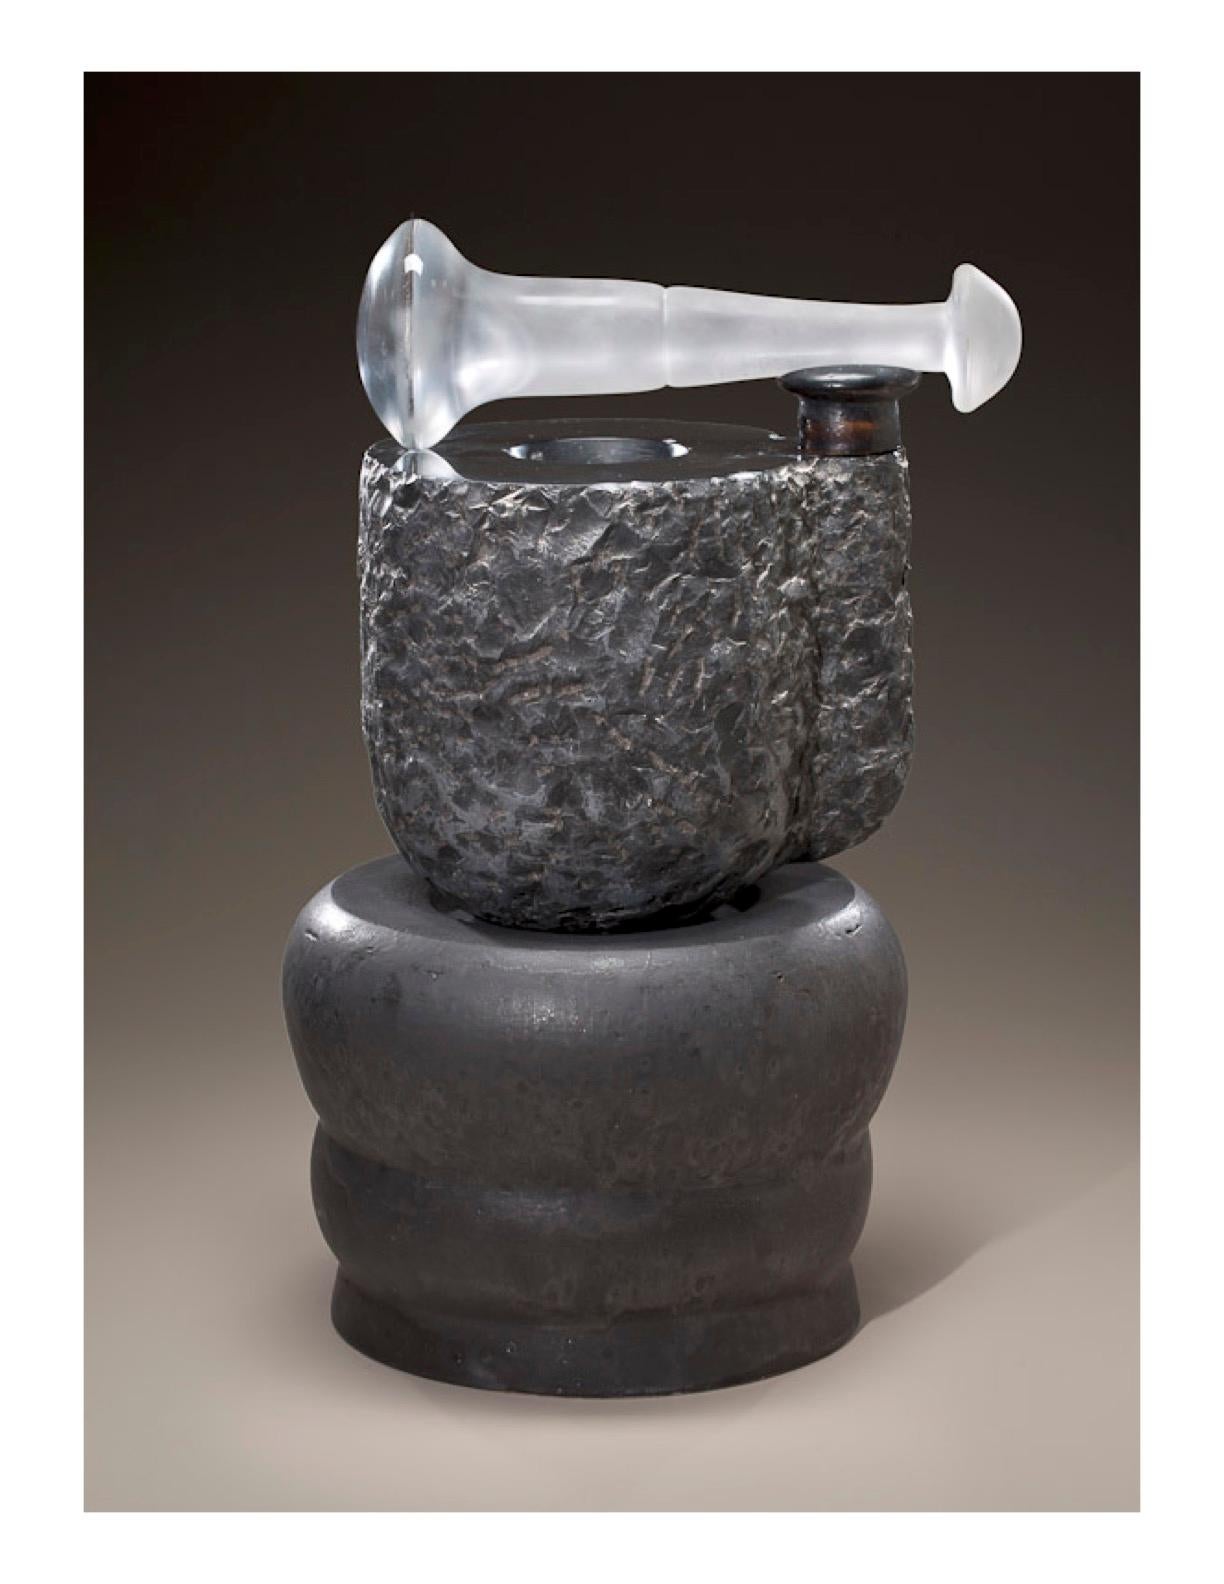 Mid-Century Modern Richard Hirsch Black Marble Mortar and Glass Pestle Sculpture, 2006 - 2010 For Sale